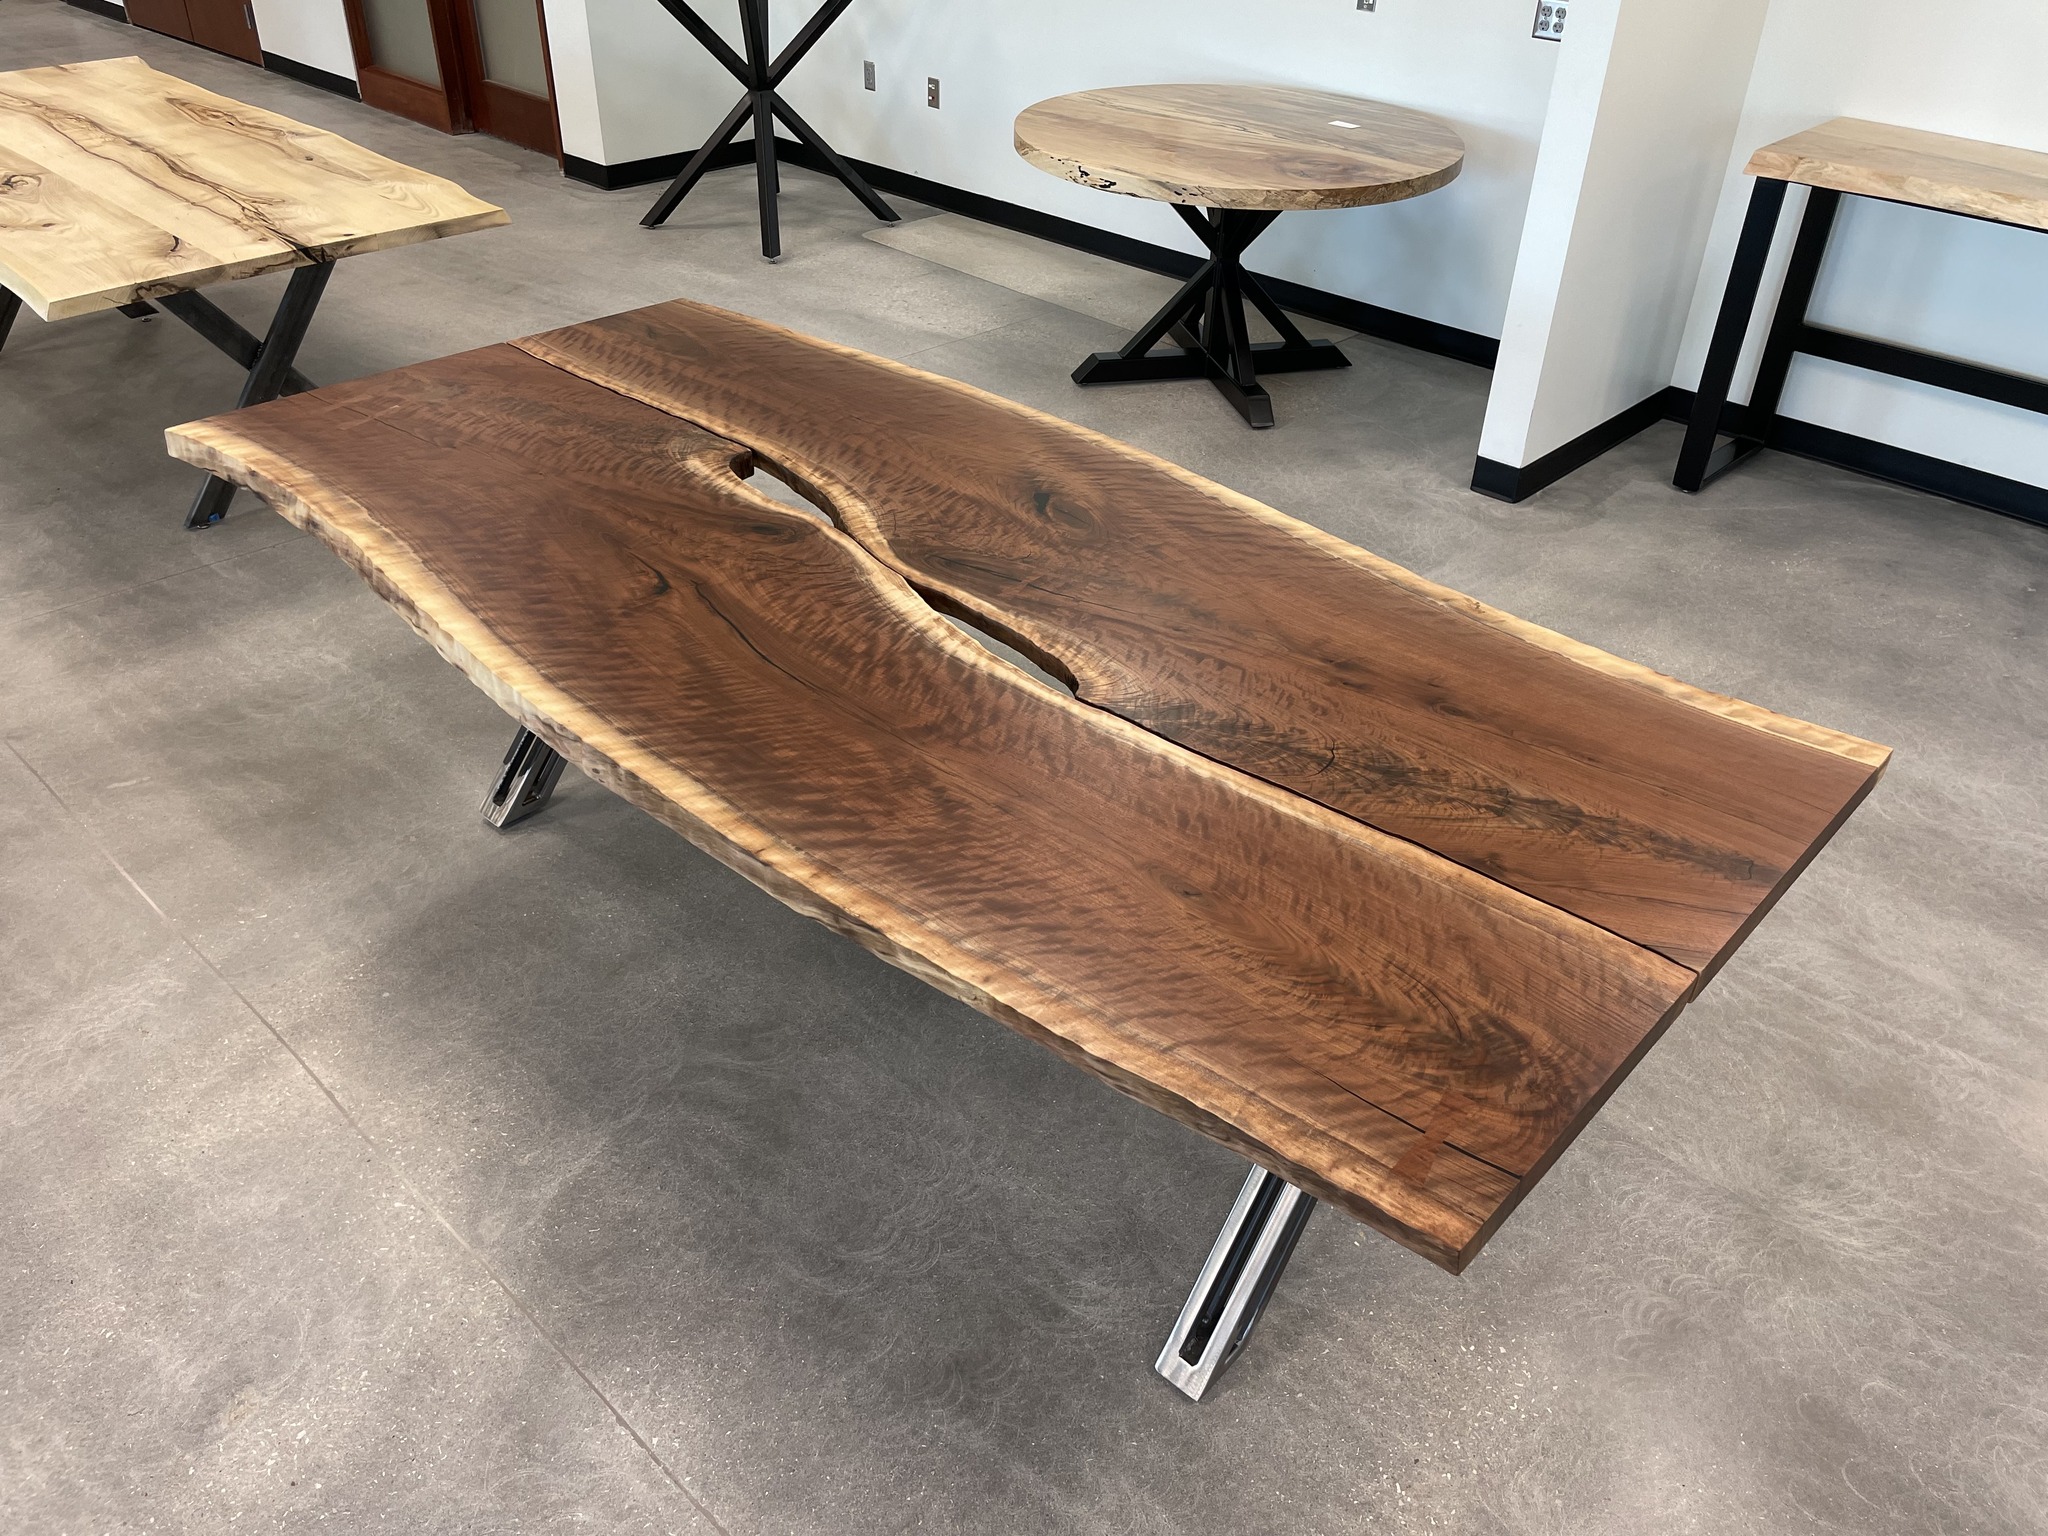 Live-edge wood furniture adds an organic touch to interior design. - design  KC